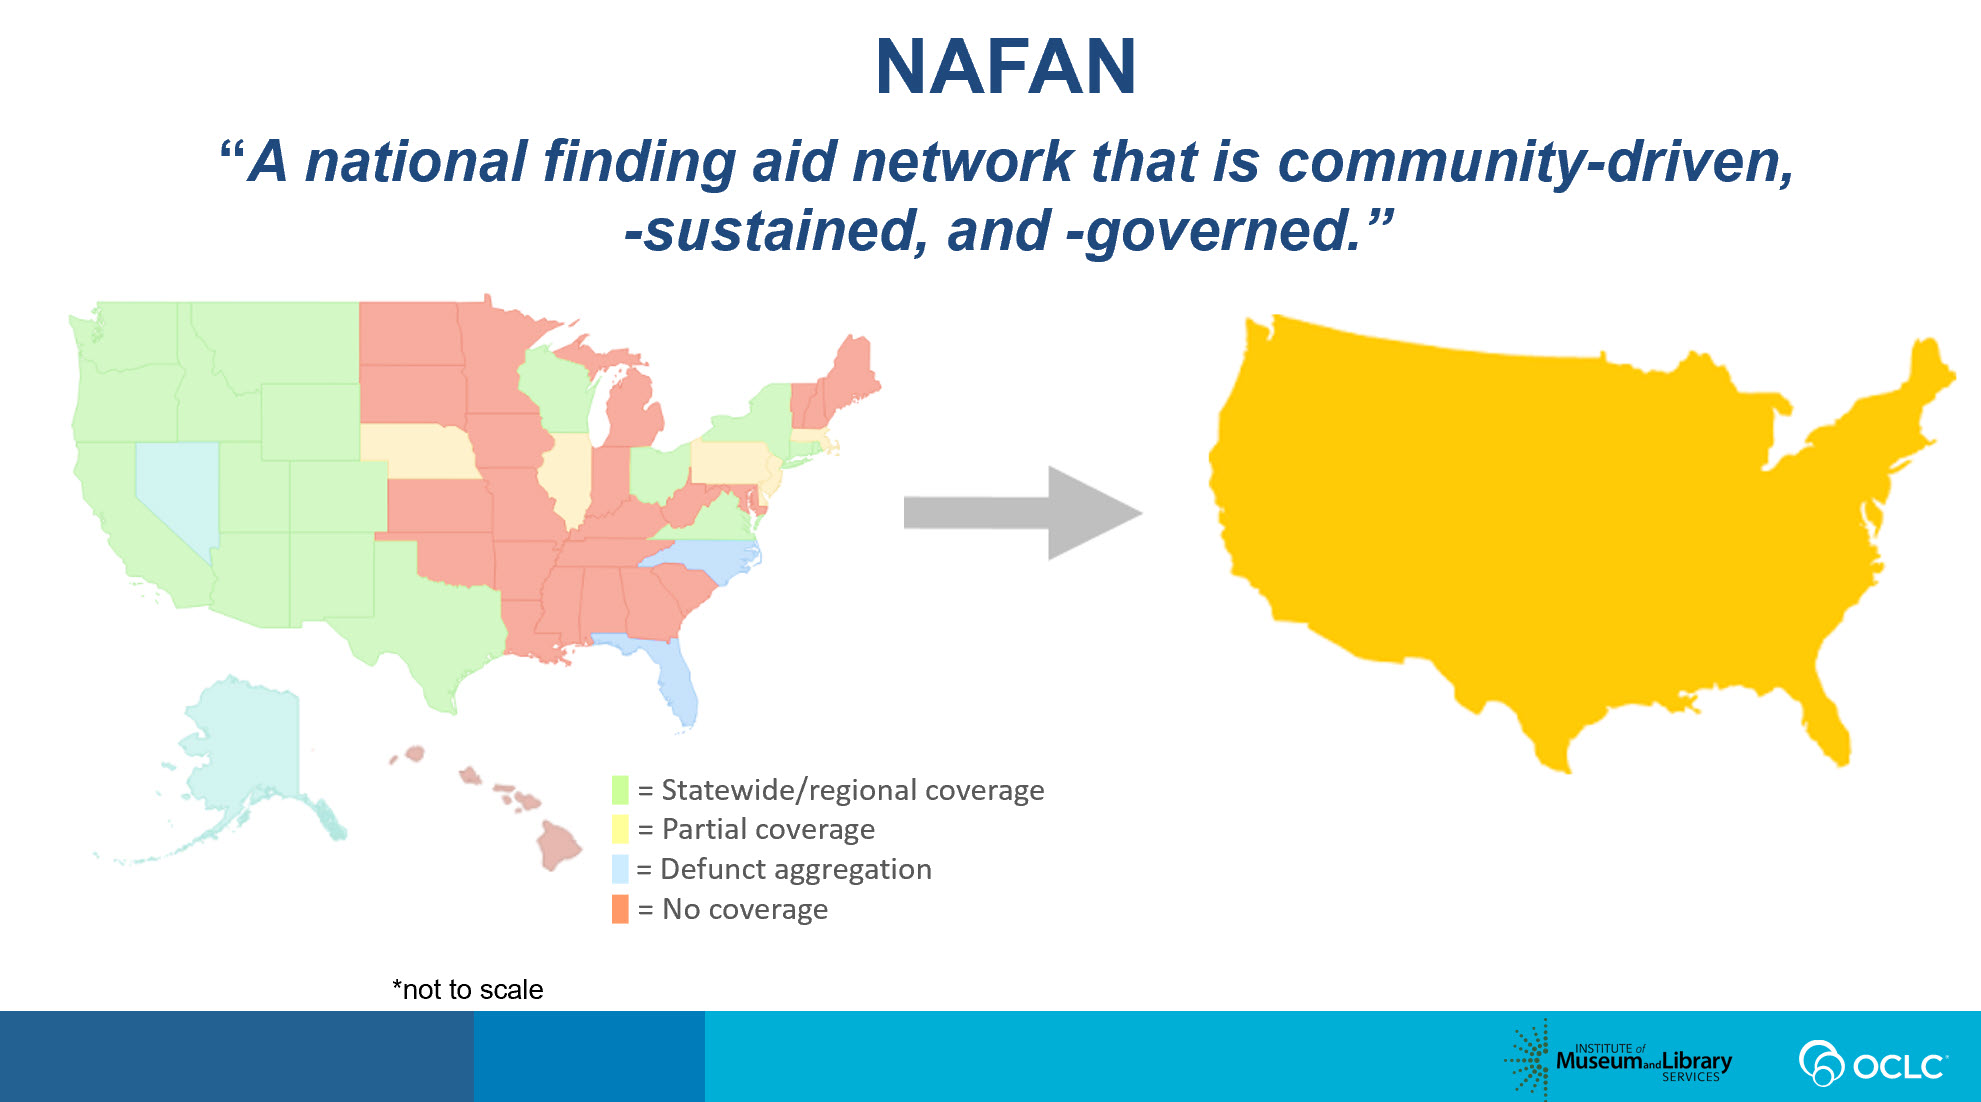 NAFAN: A national finding aid network that is community-driven, -sustained, and -governed